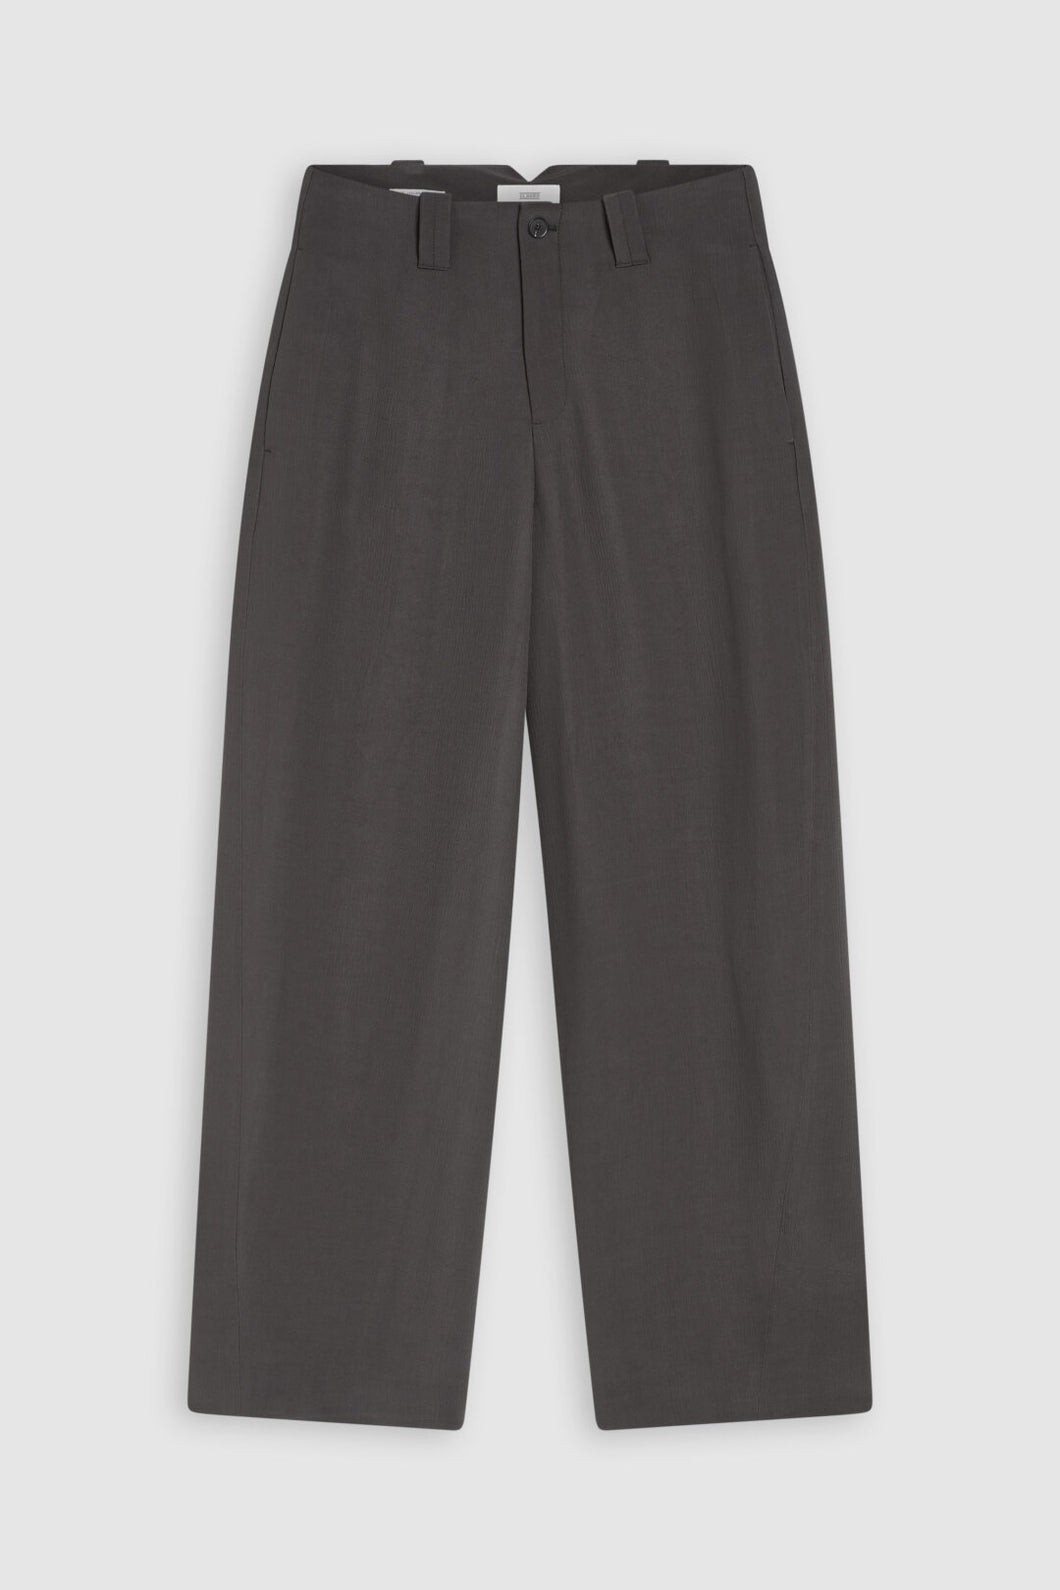 Closed Linby Trouser Charcoal C91160-537-22